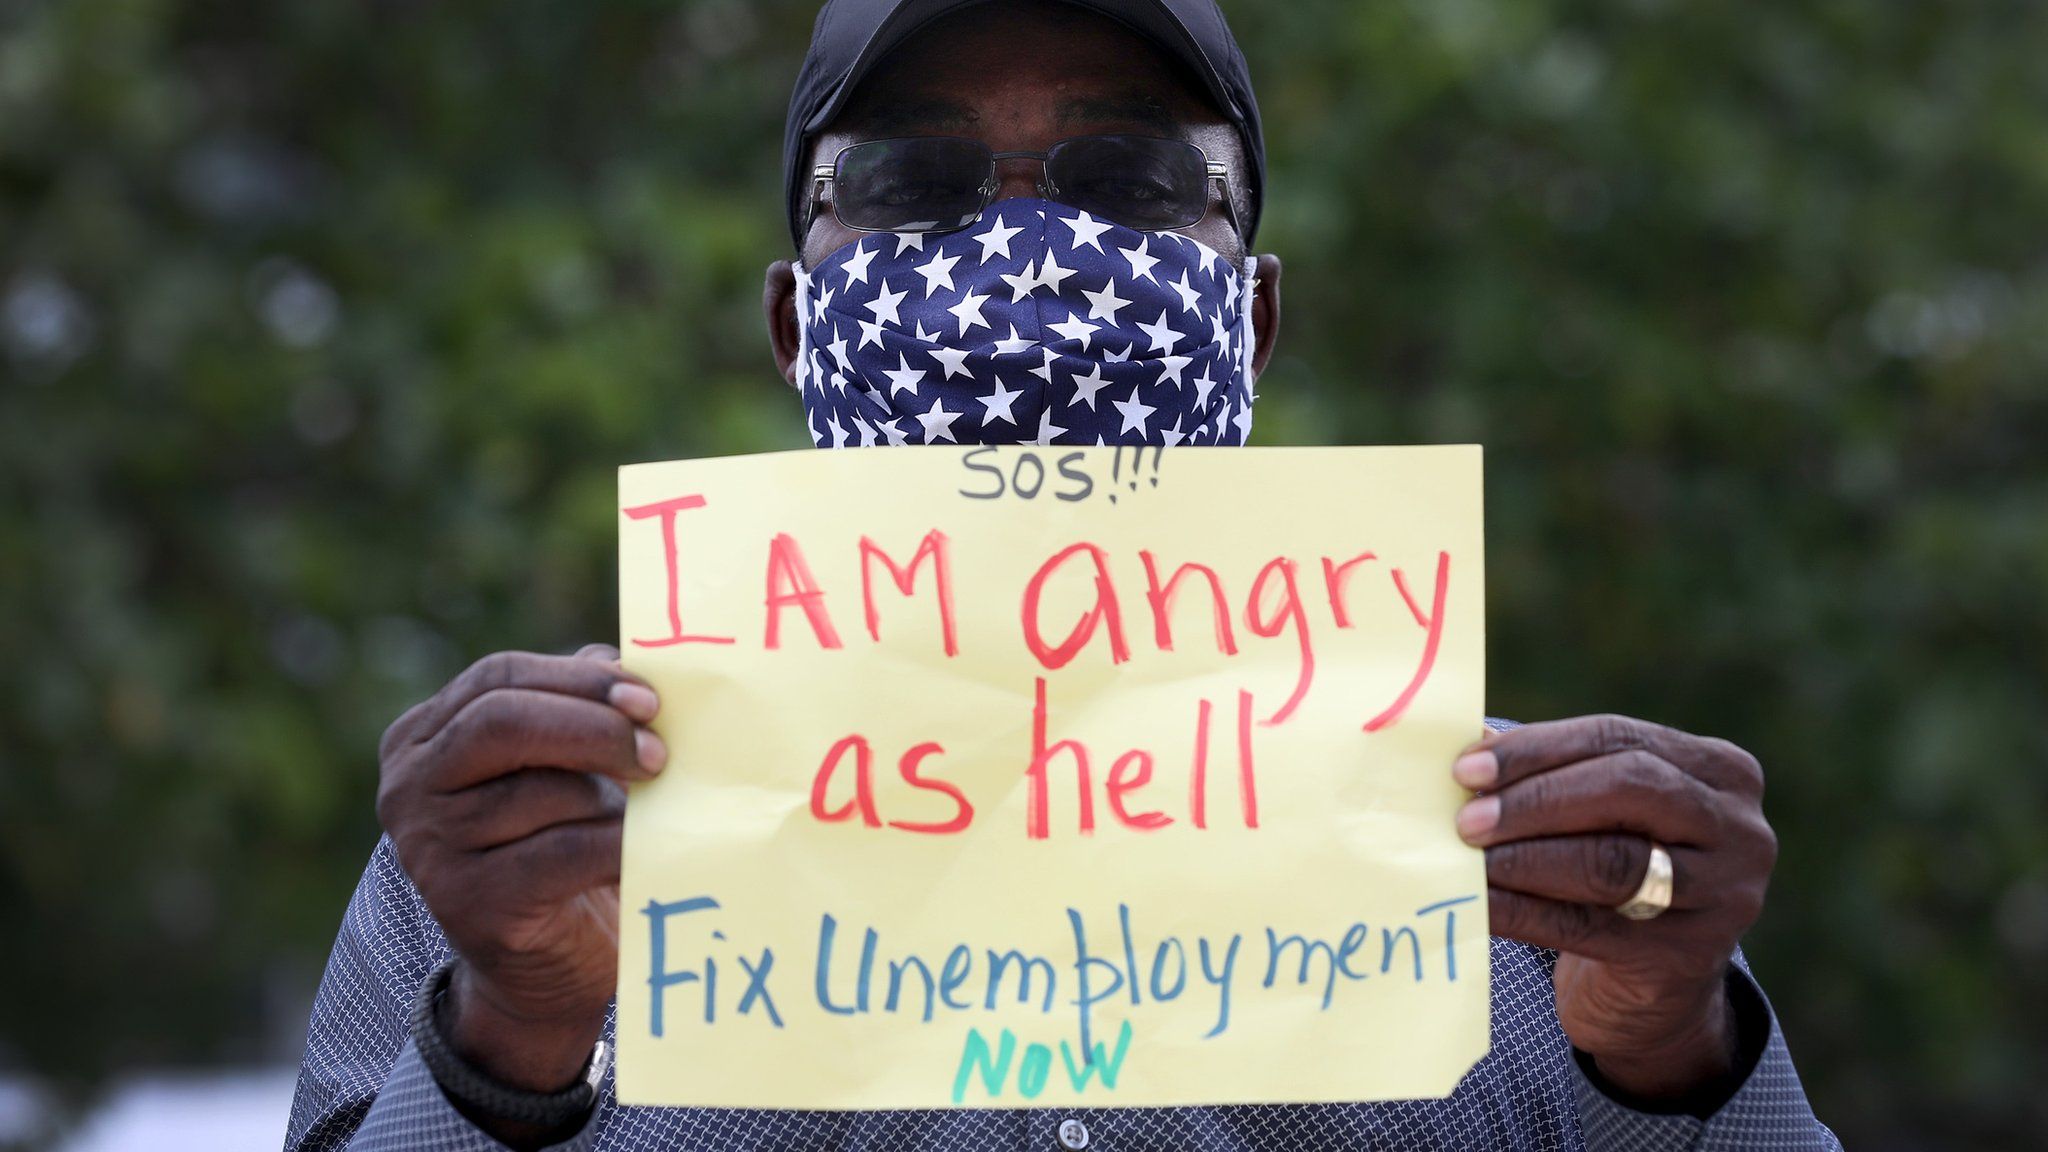 a Florida man protests gaps in the unemployment system